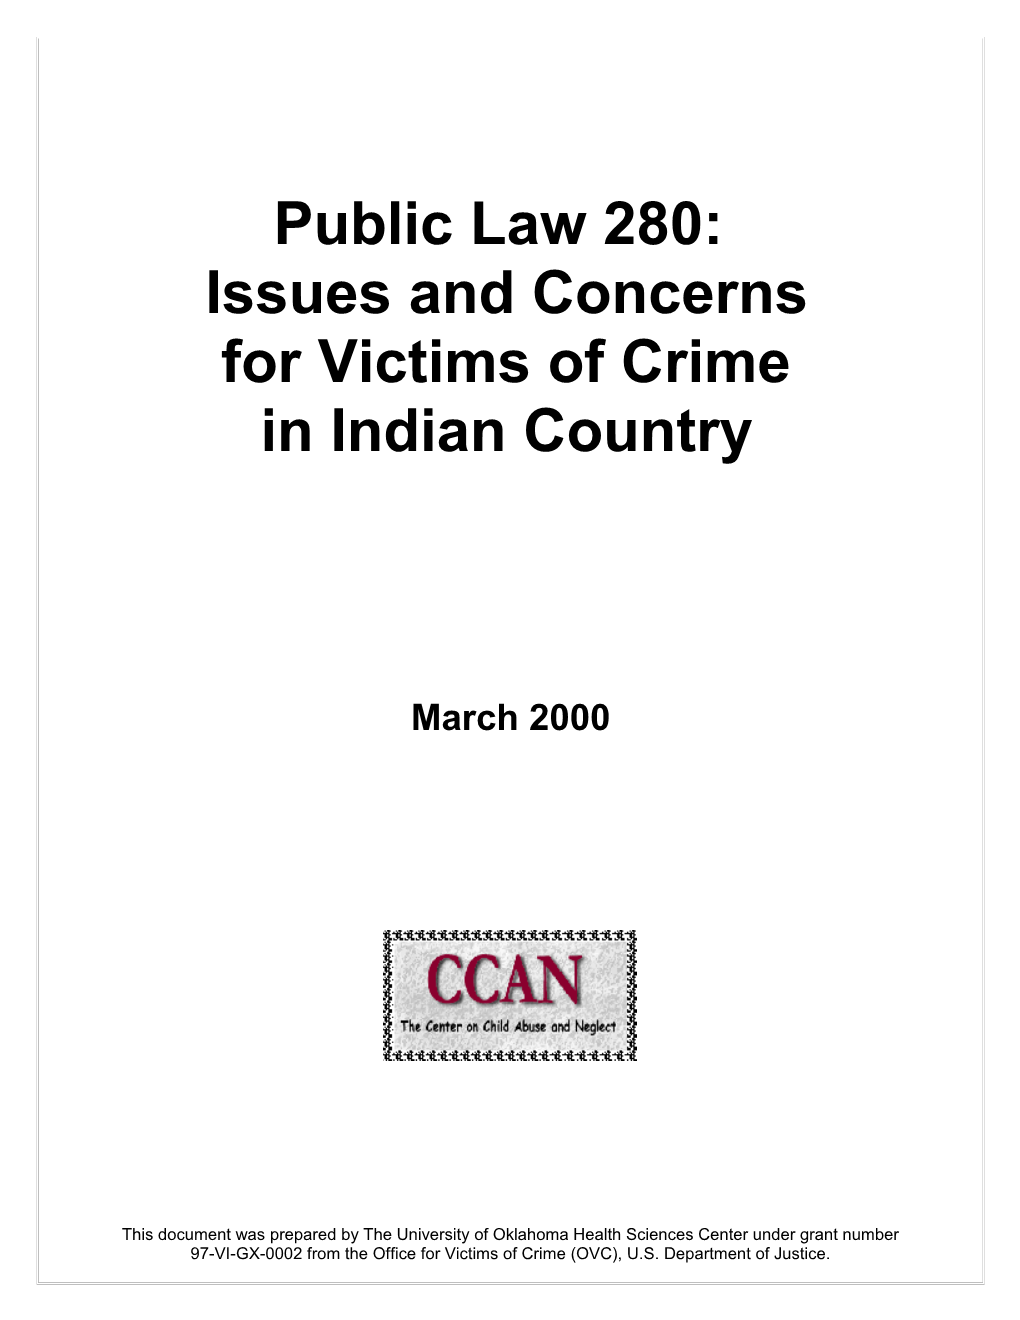 Public Law 280: Issues And Concerns For Victims Of Crime In Indian Country